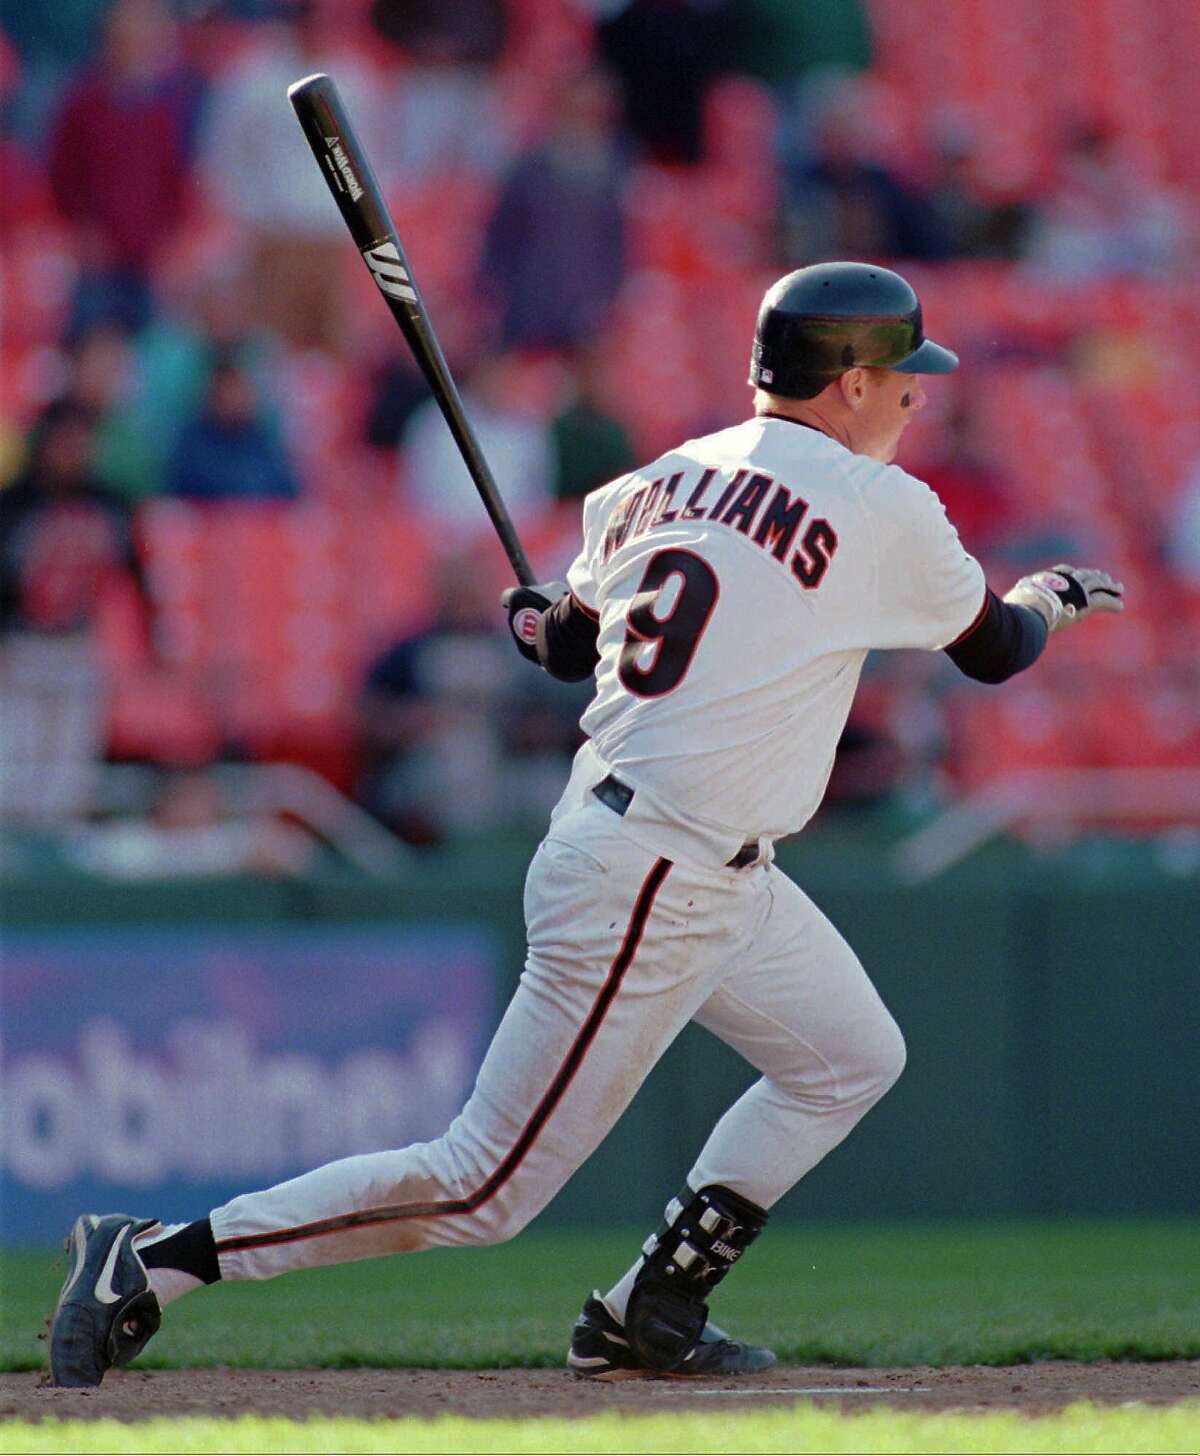 San Francisco Giants' Matt Williams hits the game-winning RBI in the 15th inning against the Los Angeles Dodgers scoring in Barry Bonds, Tuesday afternoon, May 2, 1995, at Candlestick Park. (AP Photo/Eric Risberg)